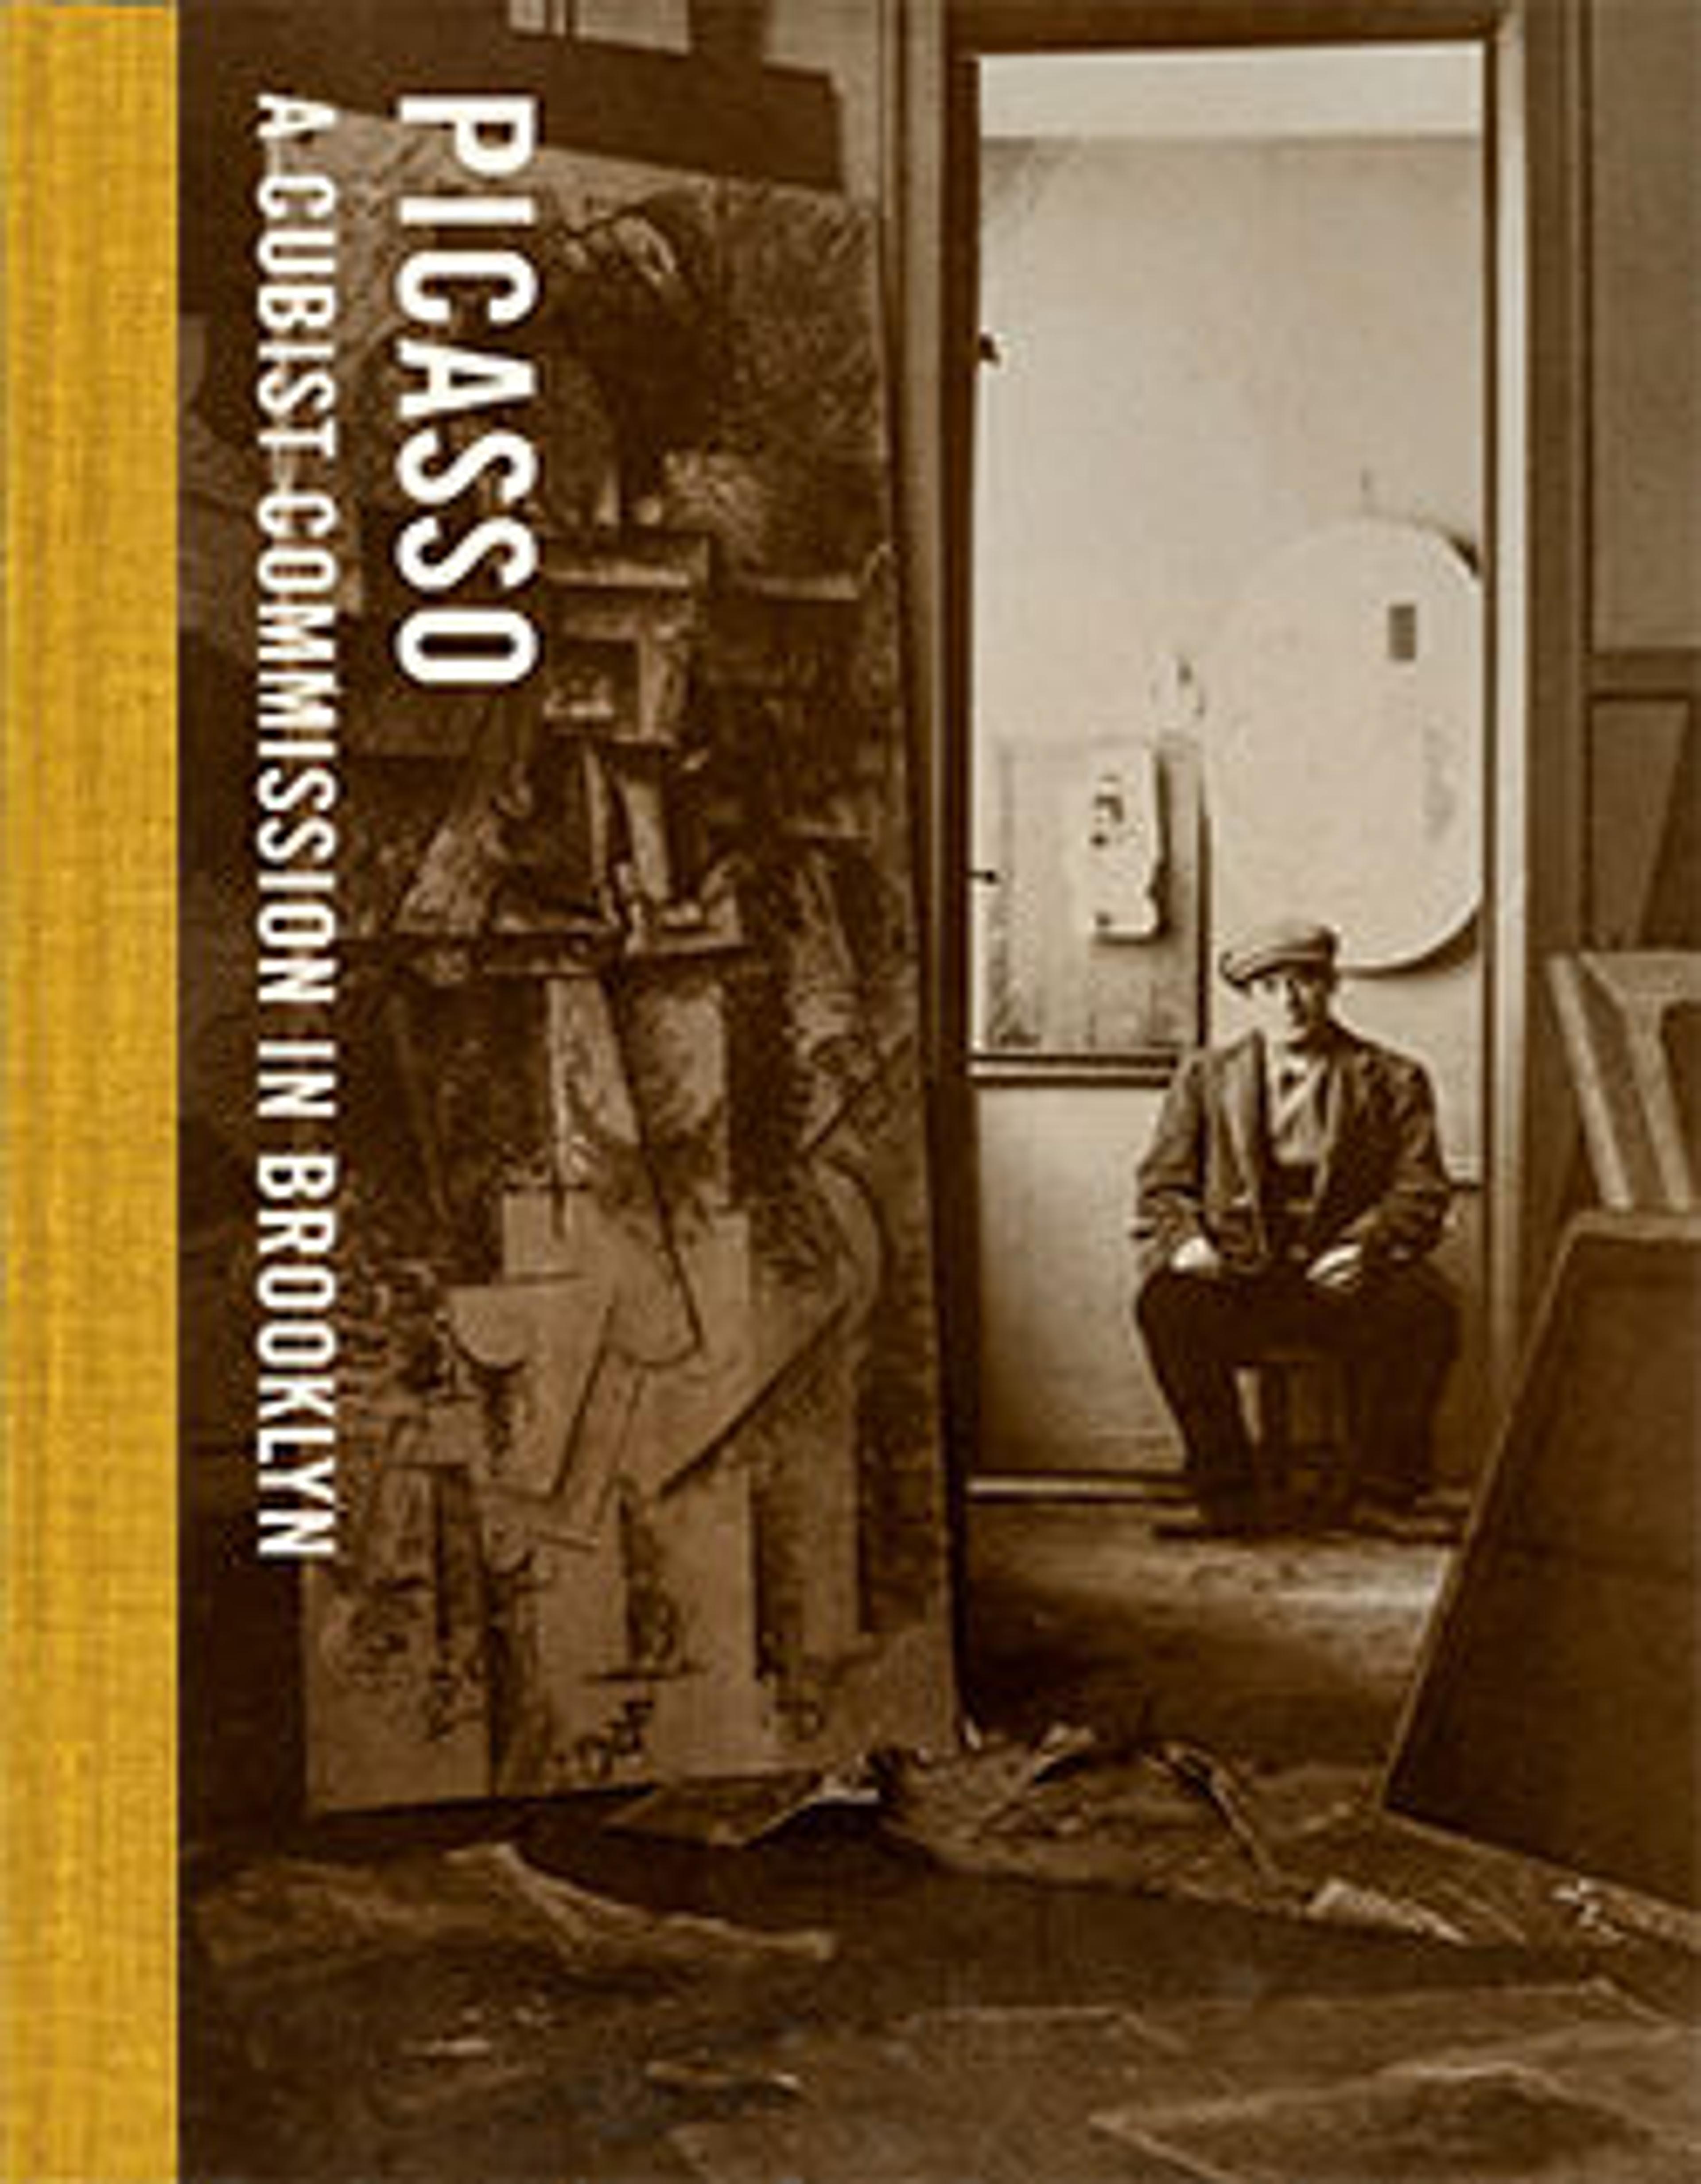 a sepia-toned photograph of a studio and a man sitting through a doorway next to which leans a large cubist painting